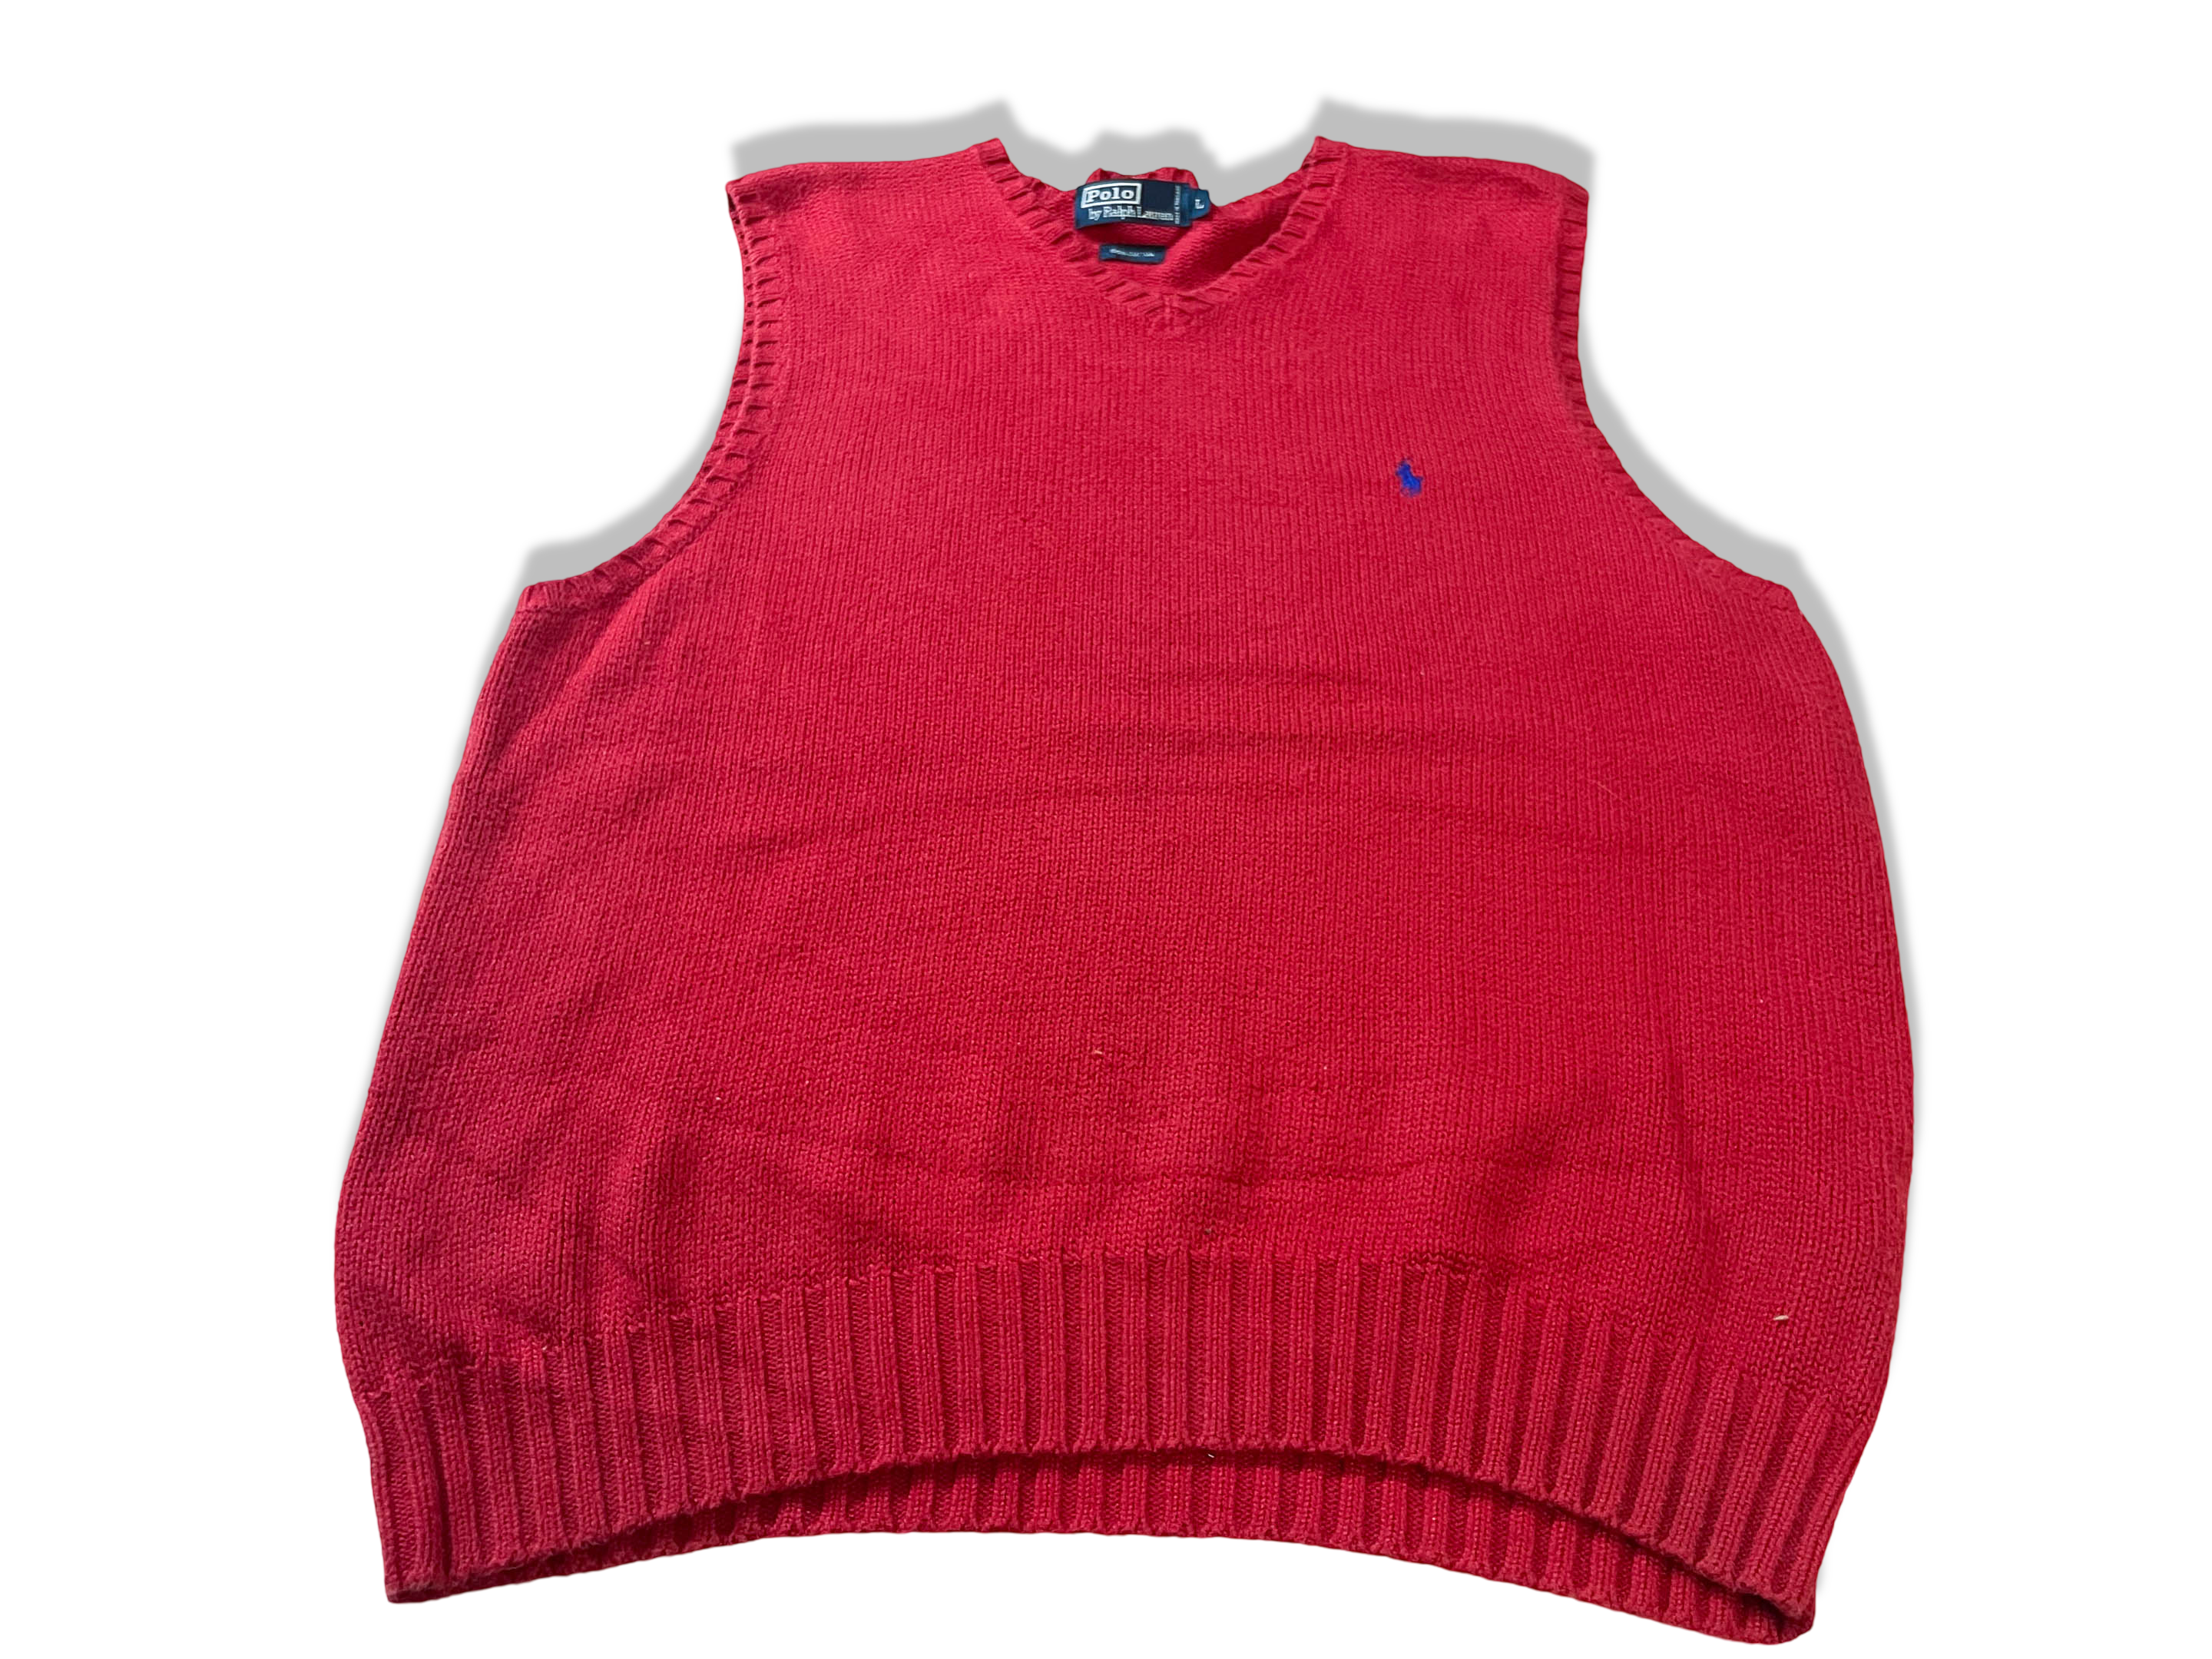 Vintage Men's Polo Ralph Lauren red sleeveless knitted sweater in L| L28 W22| SKU 3992